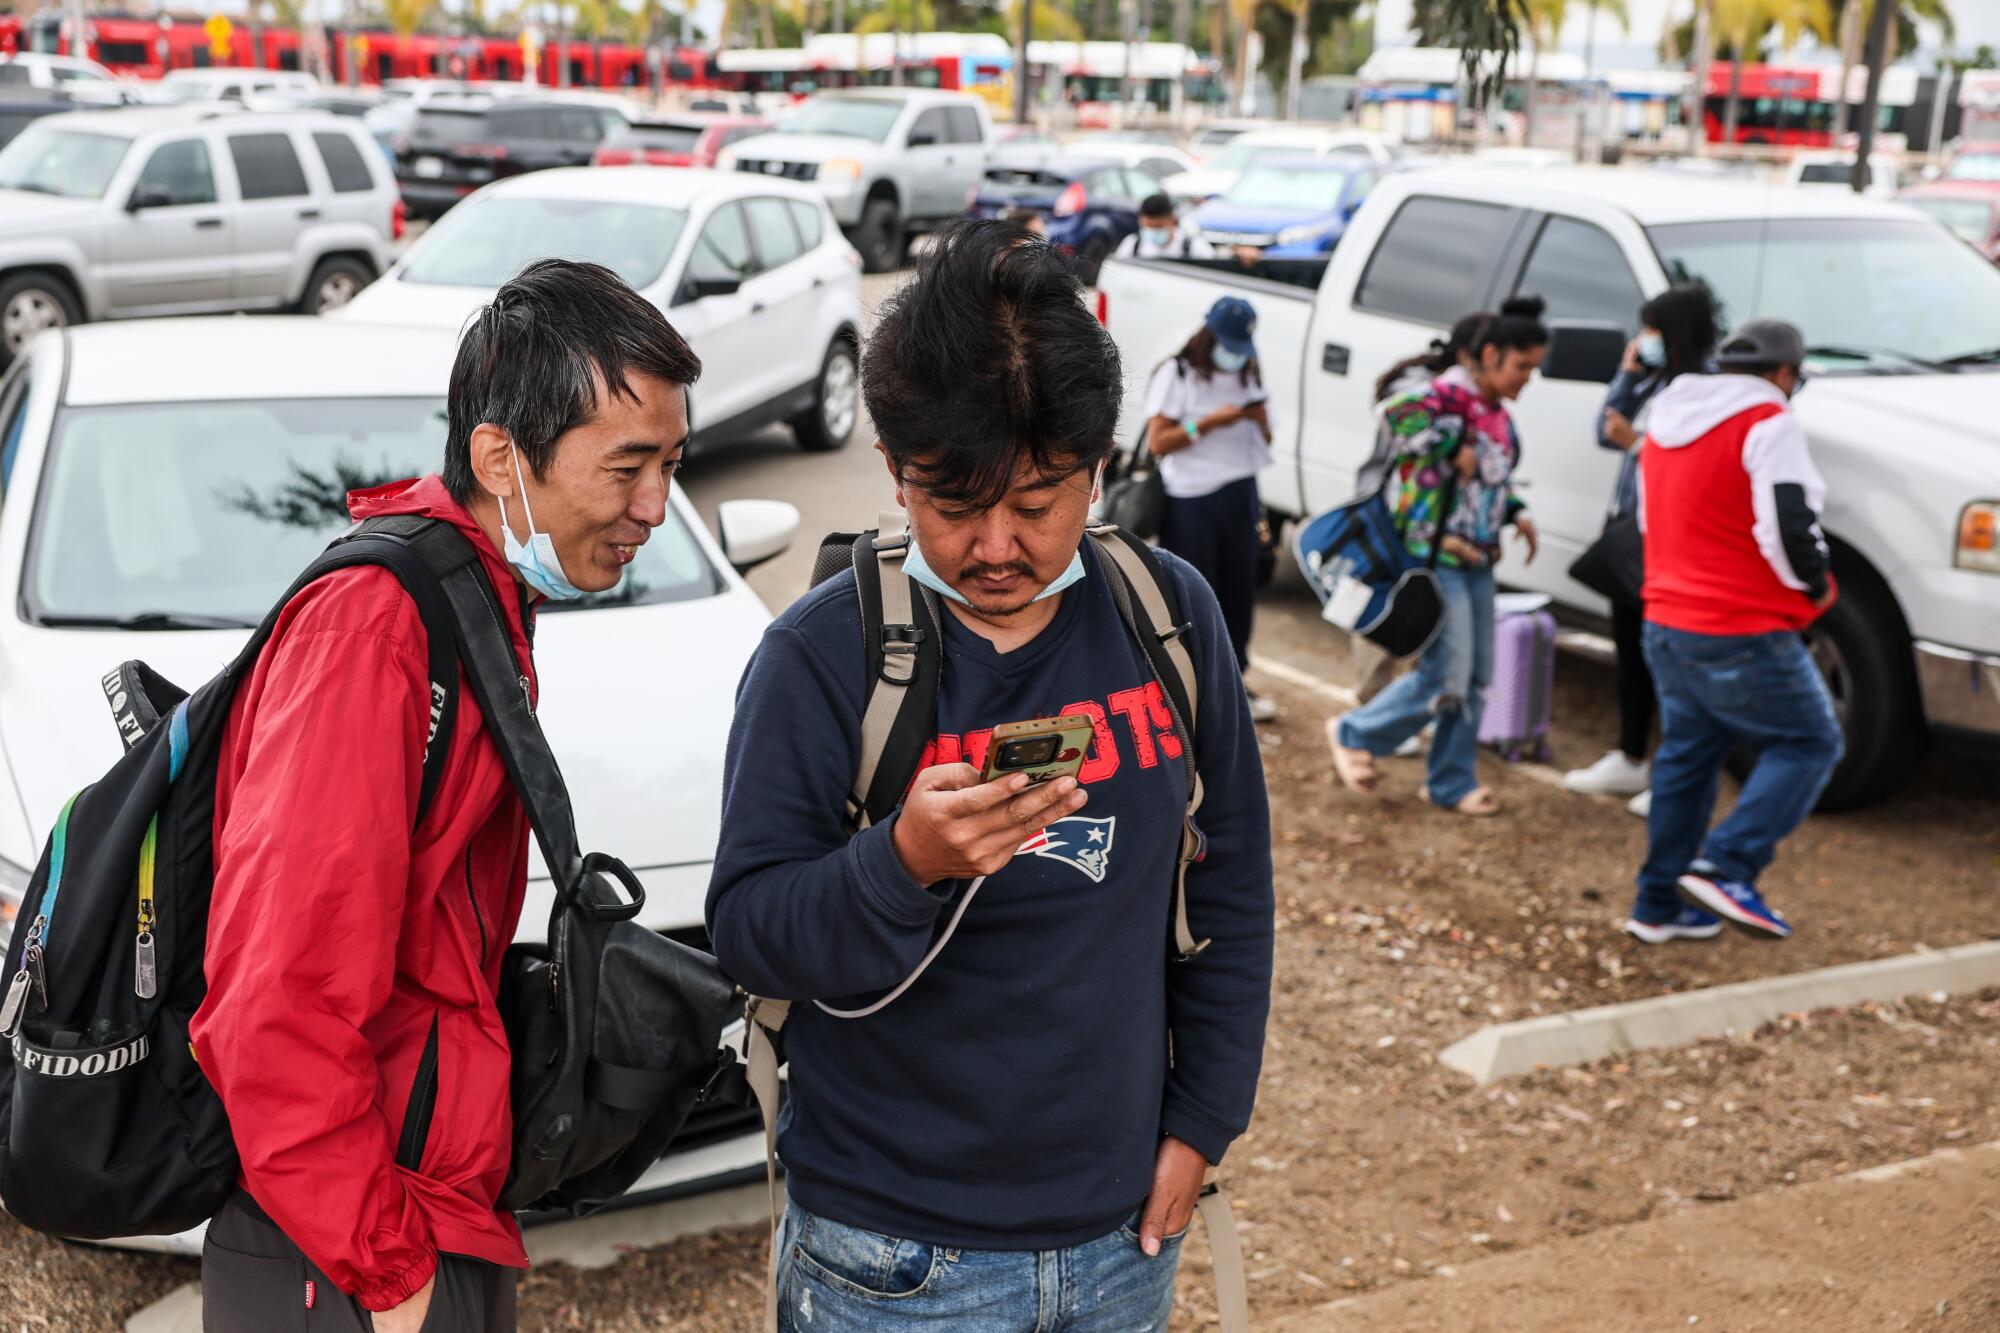 A man using his phone as another looks on and other people walk behind them in a dirt parking lot